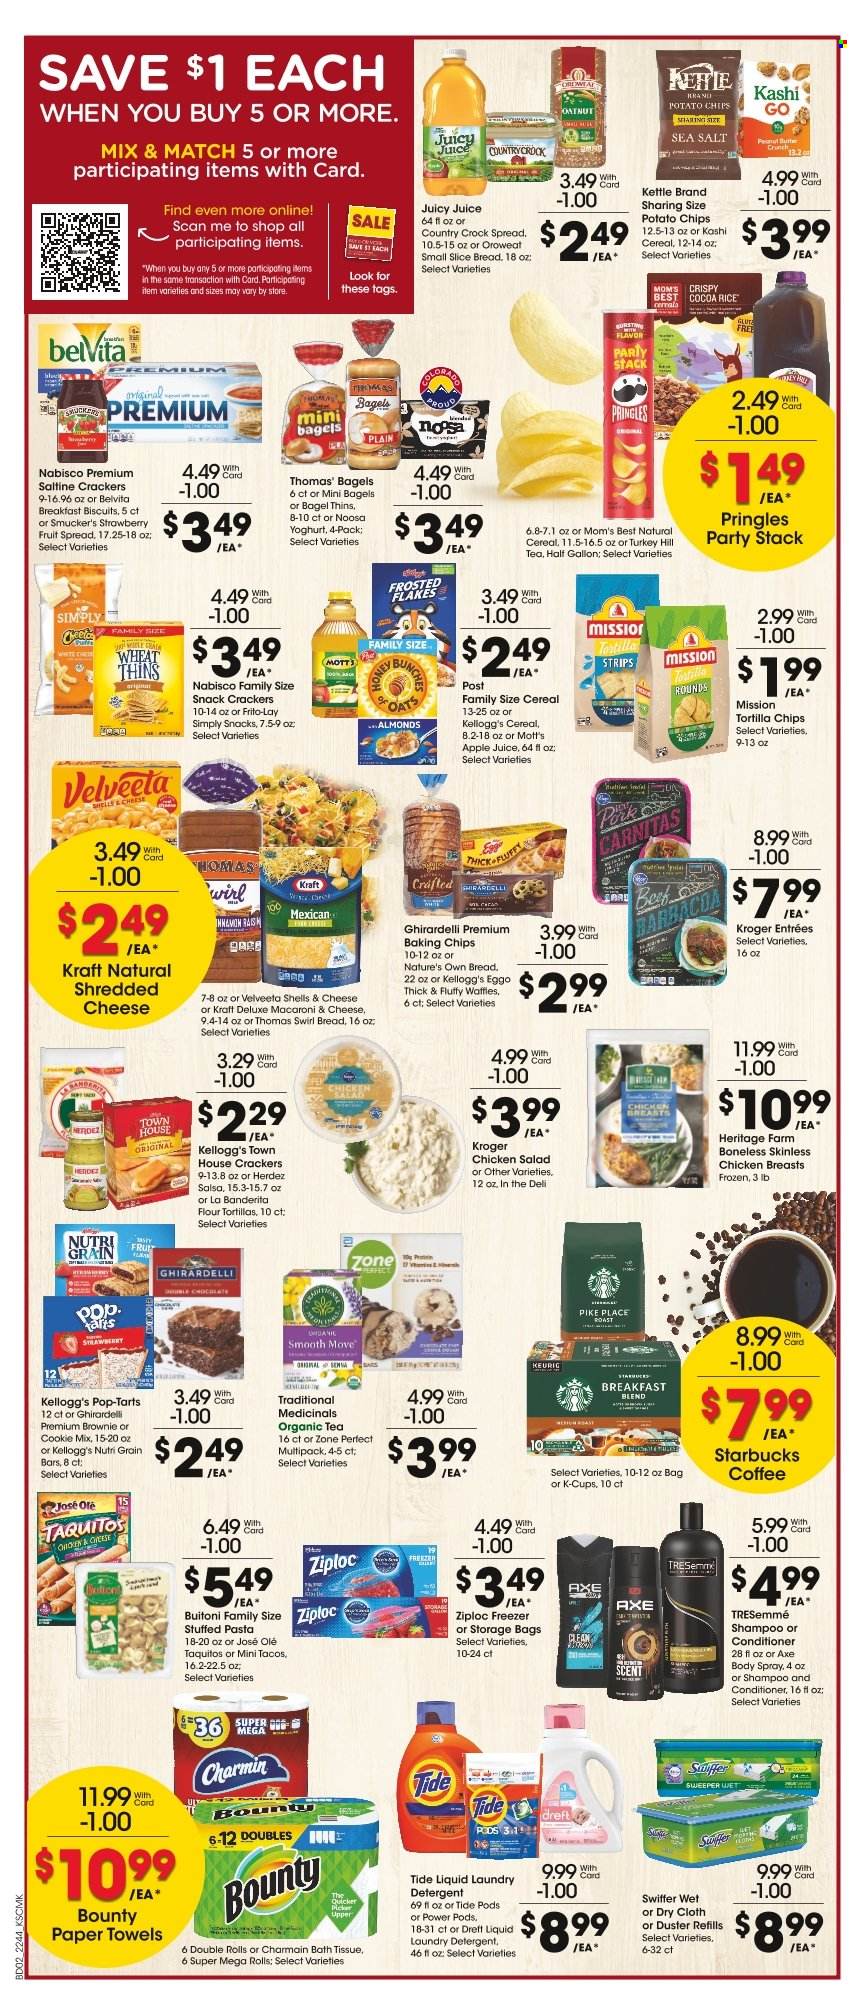 thumbnail - City Market Flyer - 11/30/2022 - 12/06/2022 - Sales products - bagels, tacos, flour tortillas, brownies, waffles, Mott's, macaroni & cheese, pasta, taquitos, Kraft®, Buitoni, chicken salad, shredded cheese, yoghurt, lard, chocolate, snack, Bounty, crackers, Kellogg's, biscuit, Pop-Tarts, Ghirardelli, tortilla chips, potato chips, Pringles, Thins, Frito-Lay, oats, baking chips, cereals, belVita, Mom's Best, cocoa rice, Zone Perfect, Nutri-Grain, salsa, fruit jam, almonds, apple juice, juice, tea, coffee, Starbucks, coffee capsules, K-Cups, Keurig, breakfast blend, chicken breasts, bath tissue, kitchen towels, paper towels, Charmin, detergent, Swiffer, Tide, laundry detergent, shampoo, conditioner, TRESemmé, body spray, Axe, Ziploc, storage bag, duster, Nature's Own. Page 2.